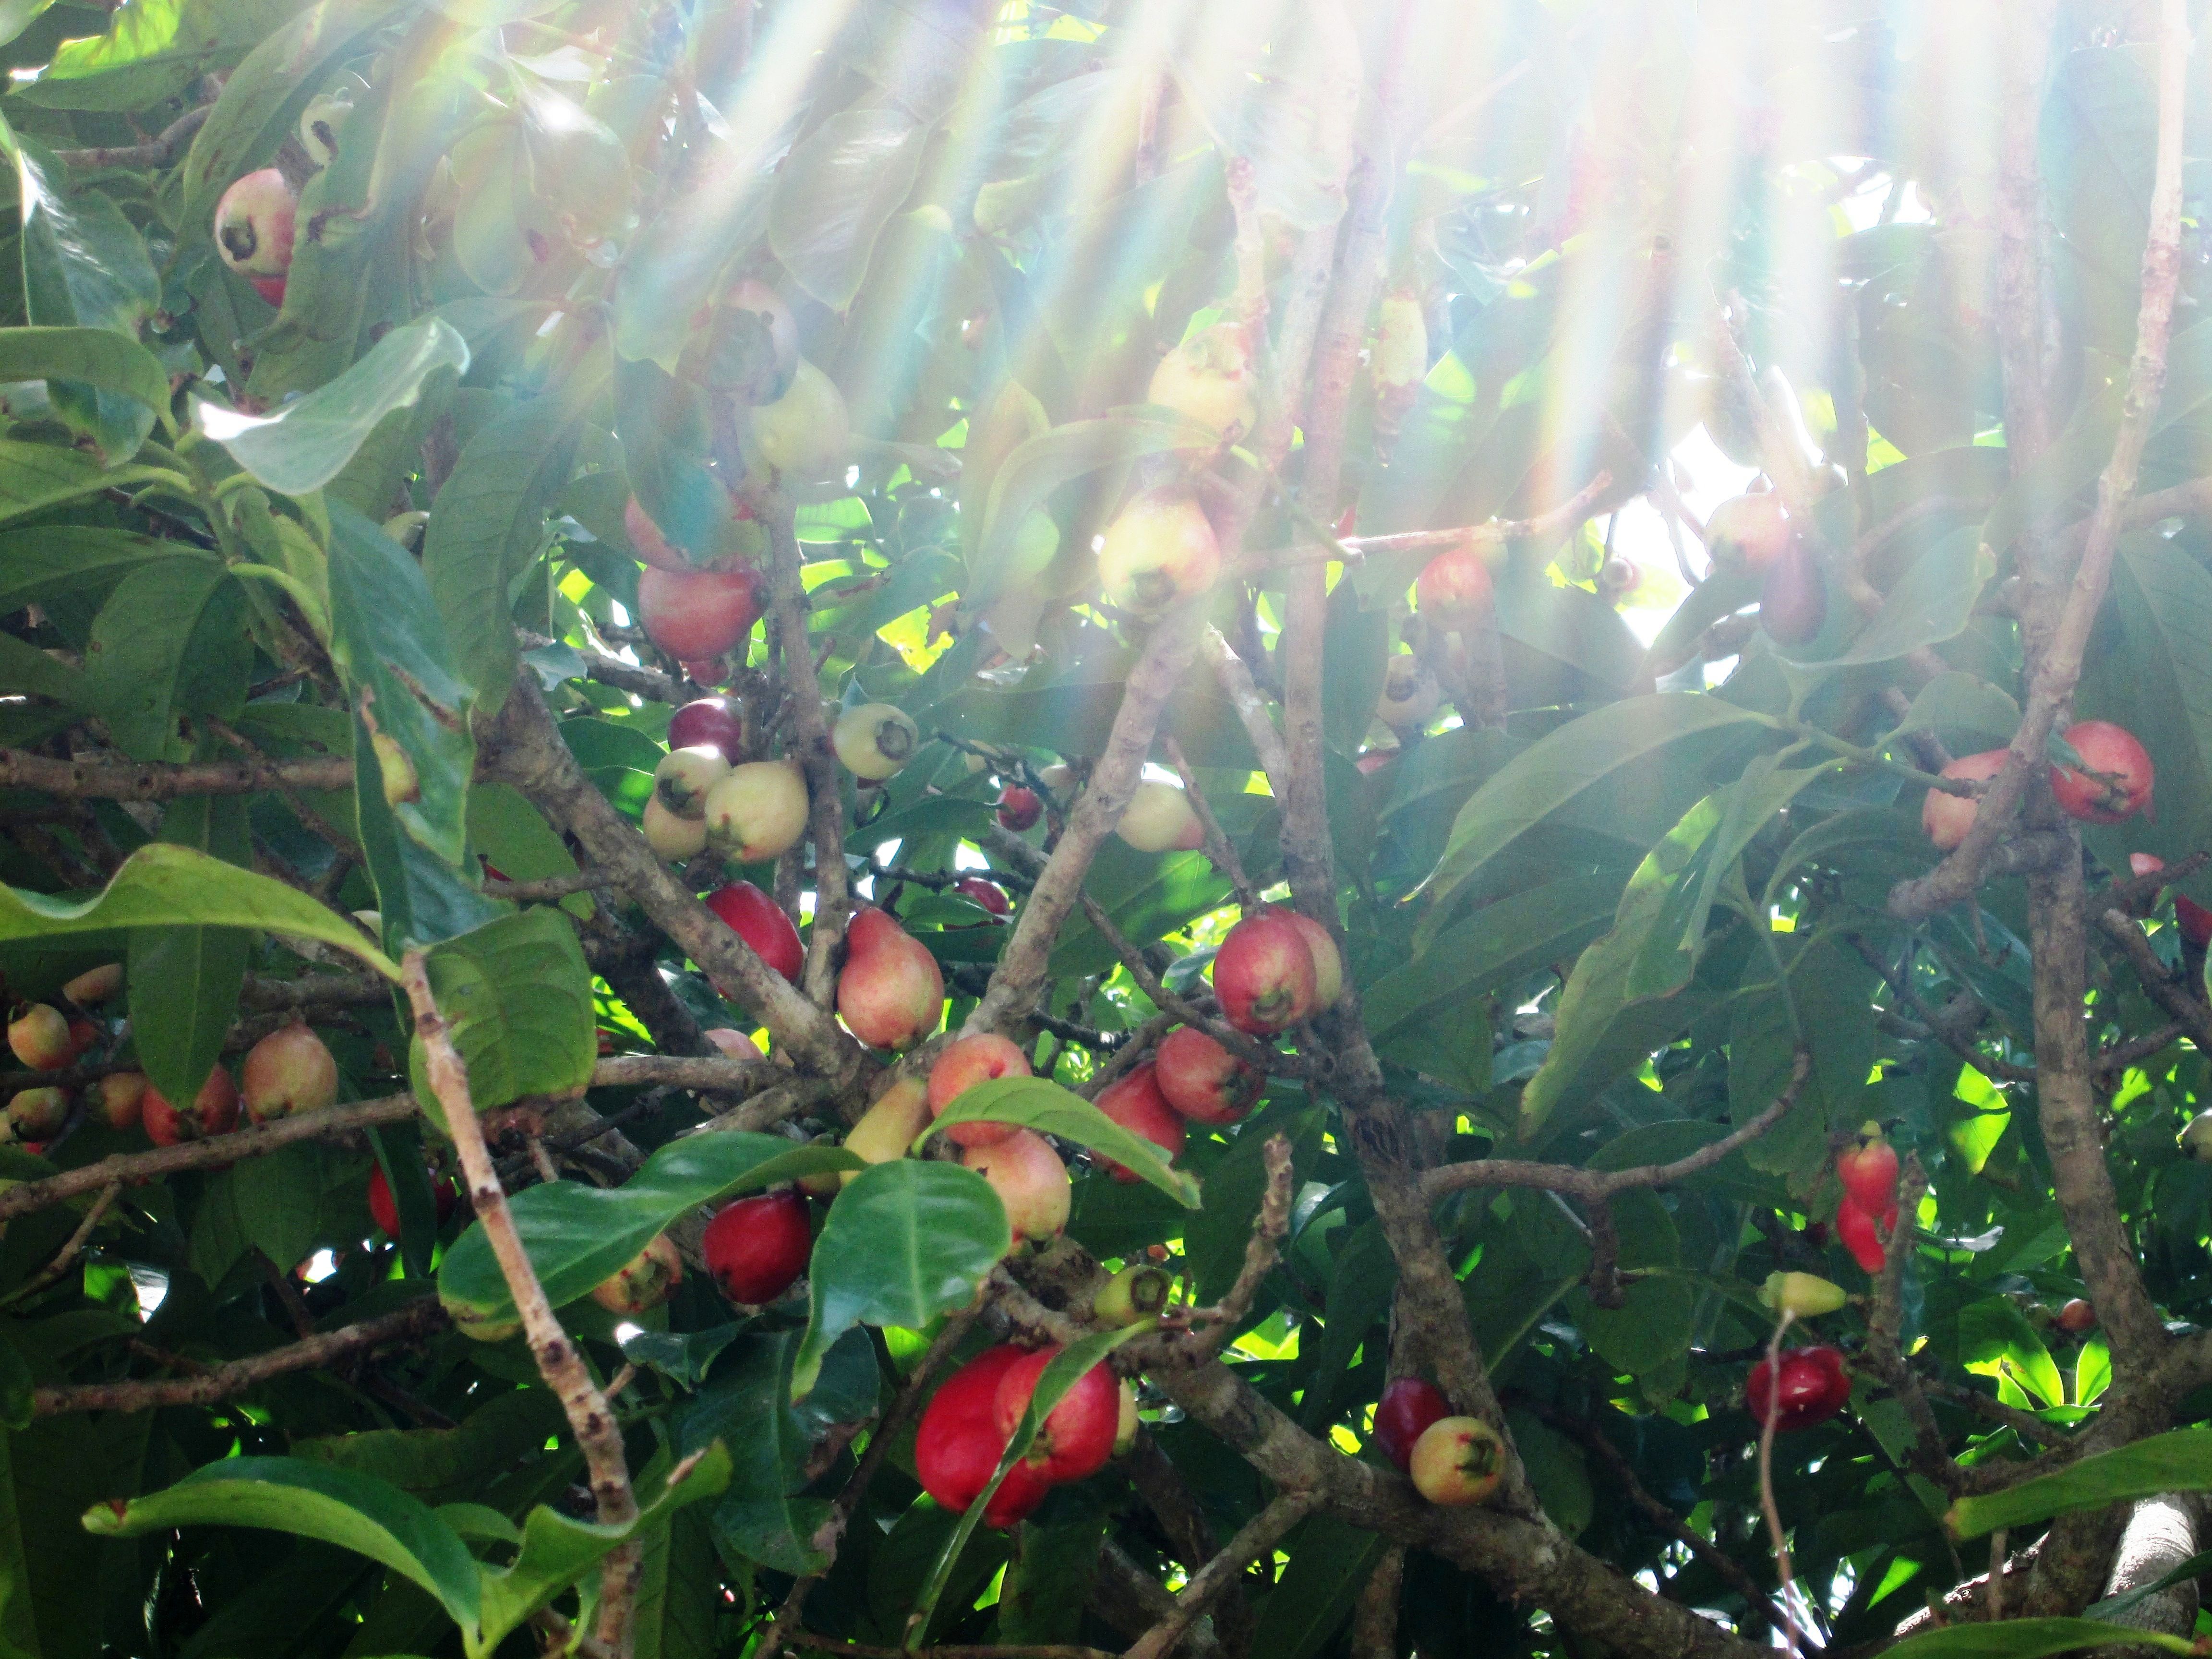 Light of life: the rays of the sun penetrate through the foliage of a tropical fruit tree called "water apples"